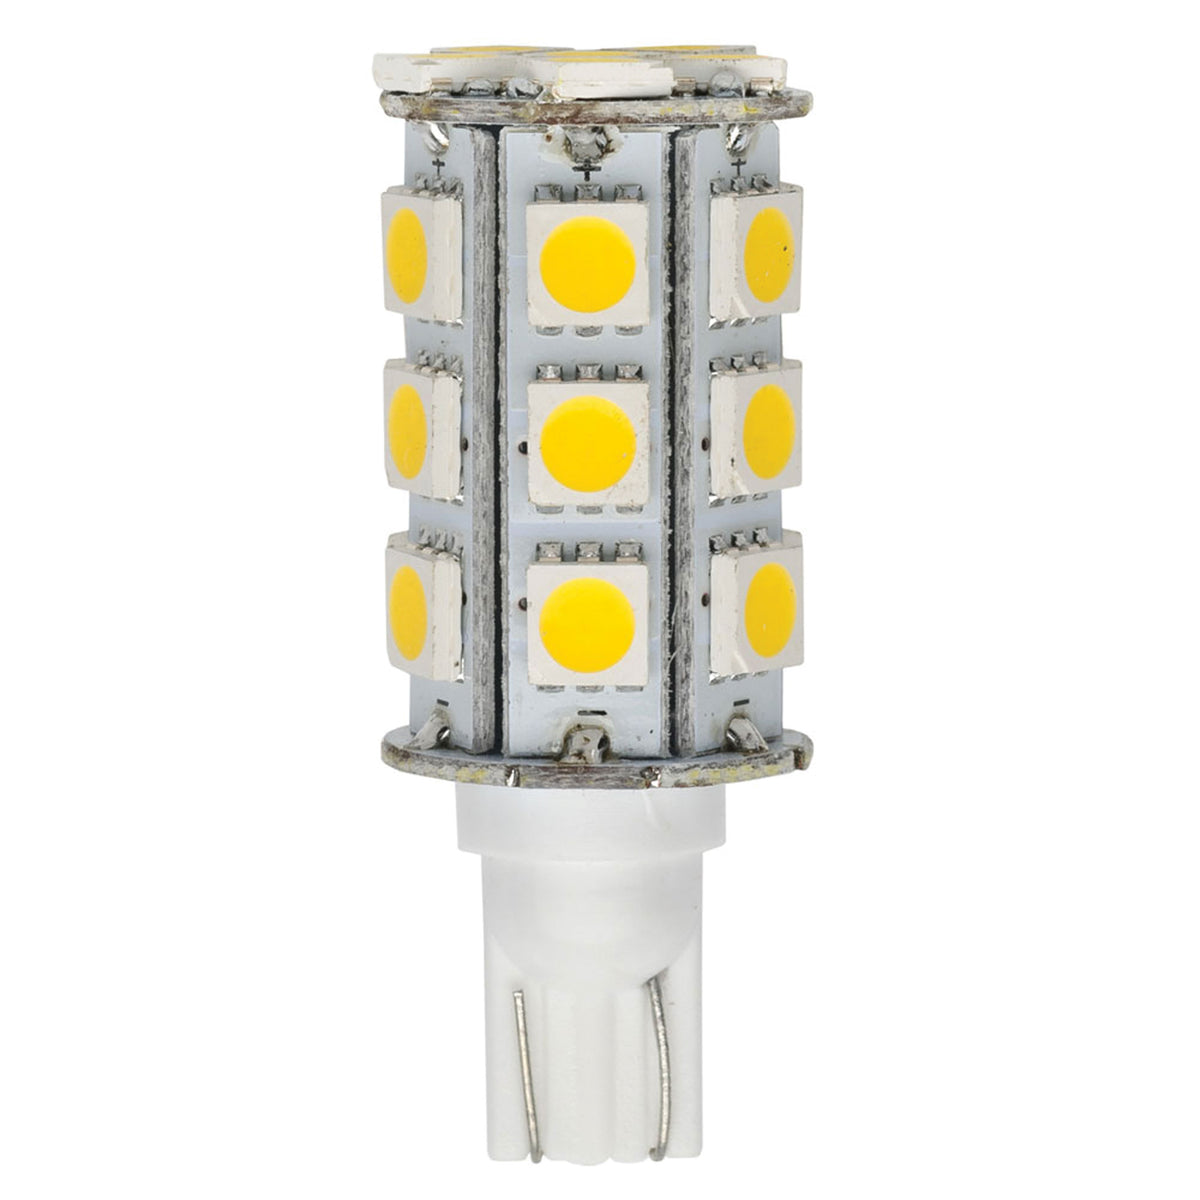 AP Products 016-921-280 Star Lights LED Replacement for Wedge Spotlight Bulbs - 280 Lumens